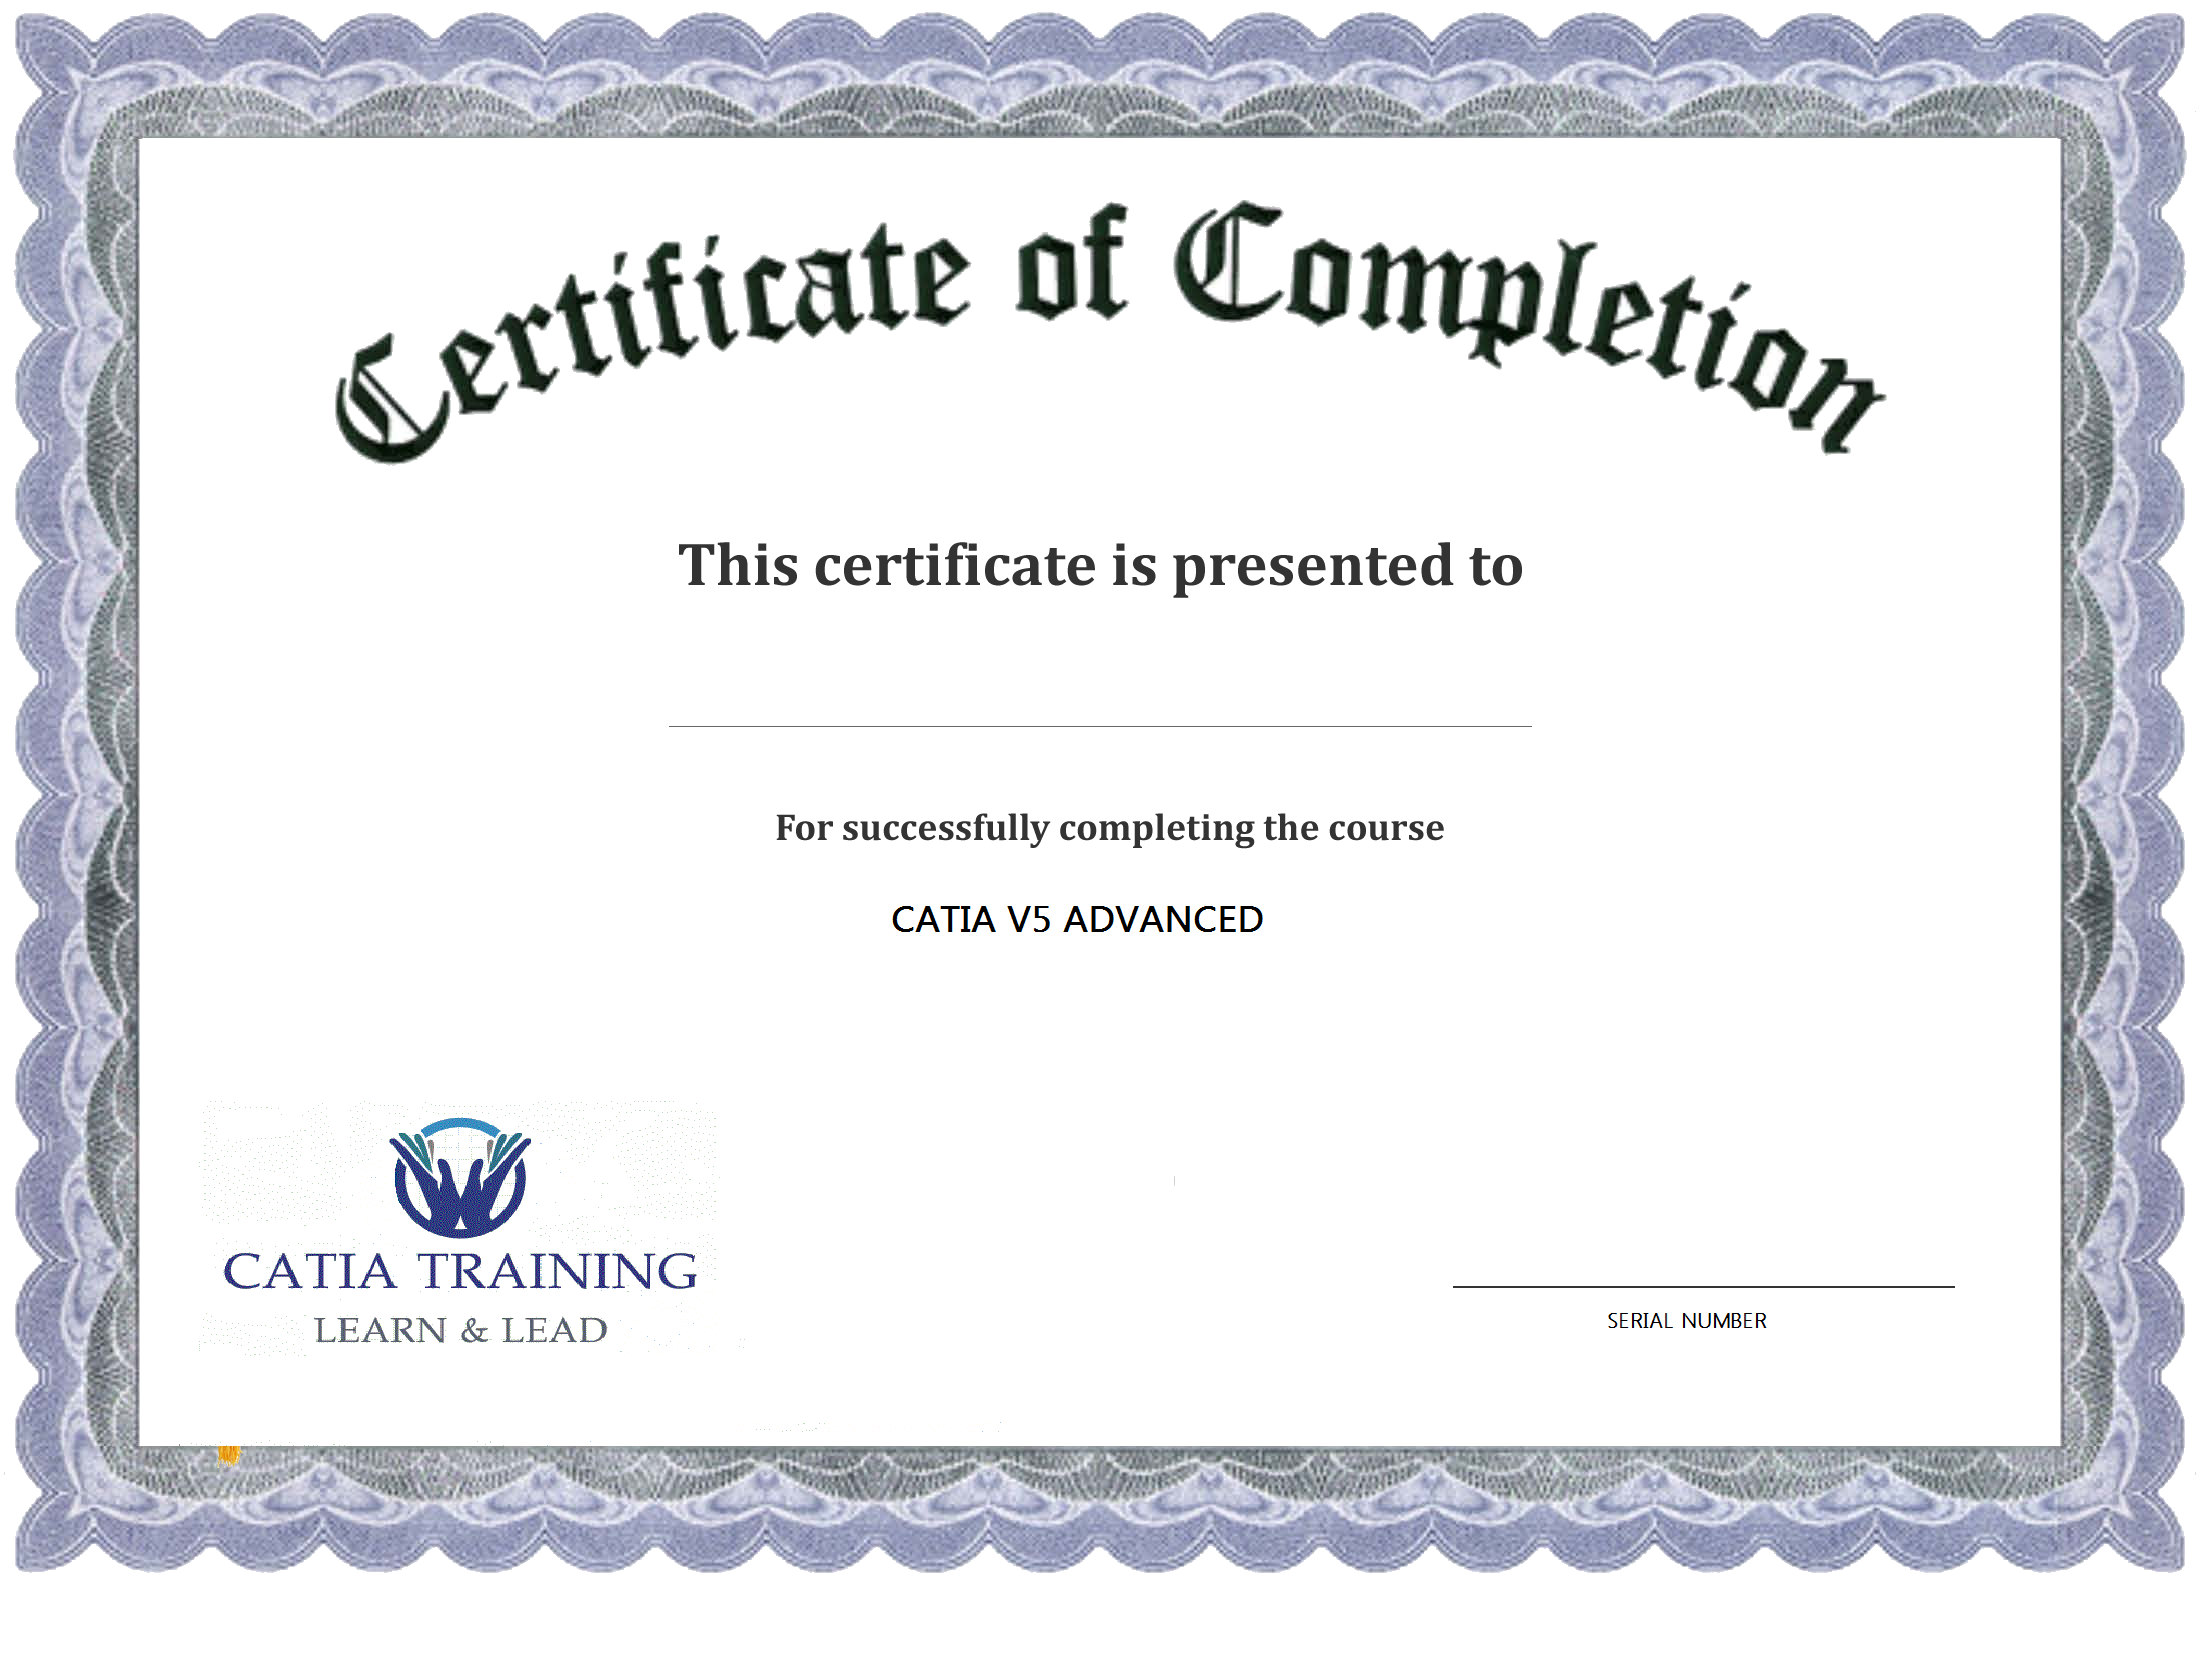 20 Certificate Of Completion Templates Free Download Images - Free Pertaining To Training Certificate Template Word Format